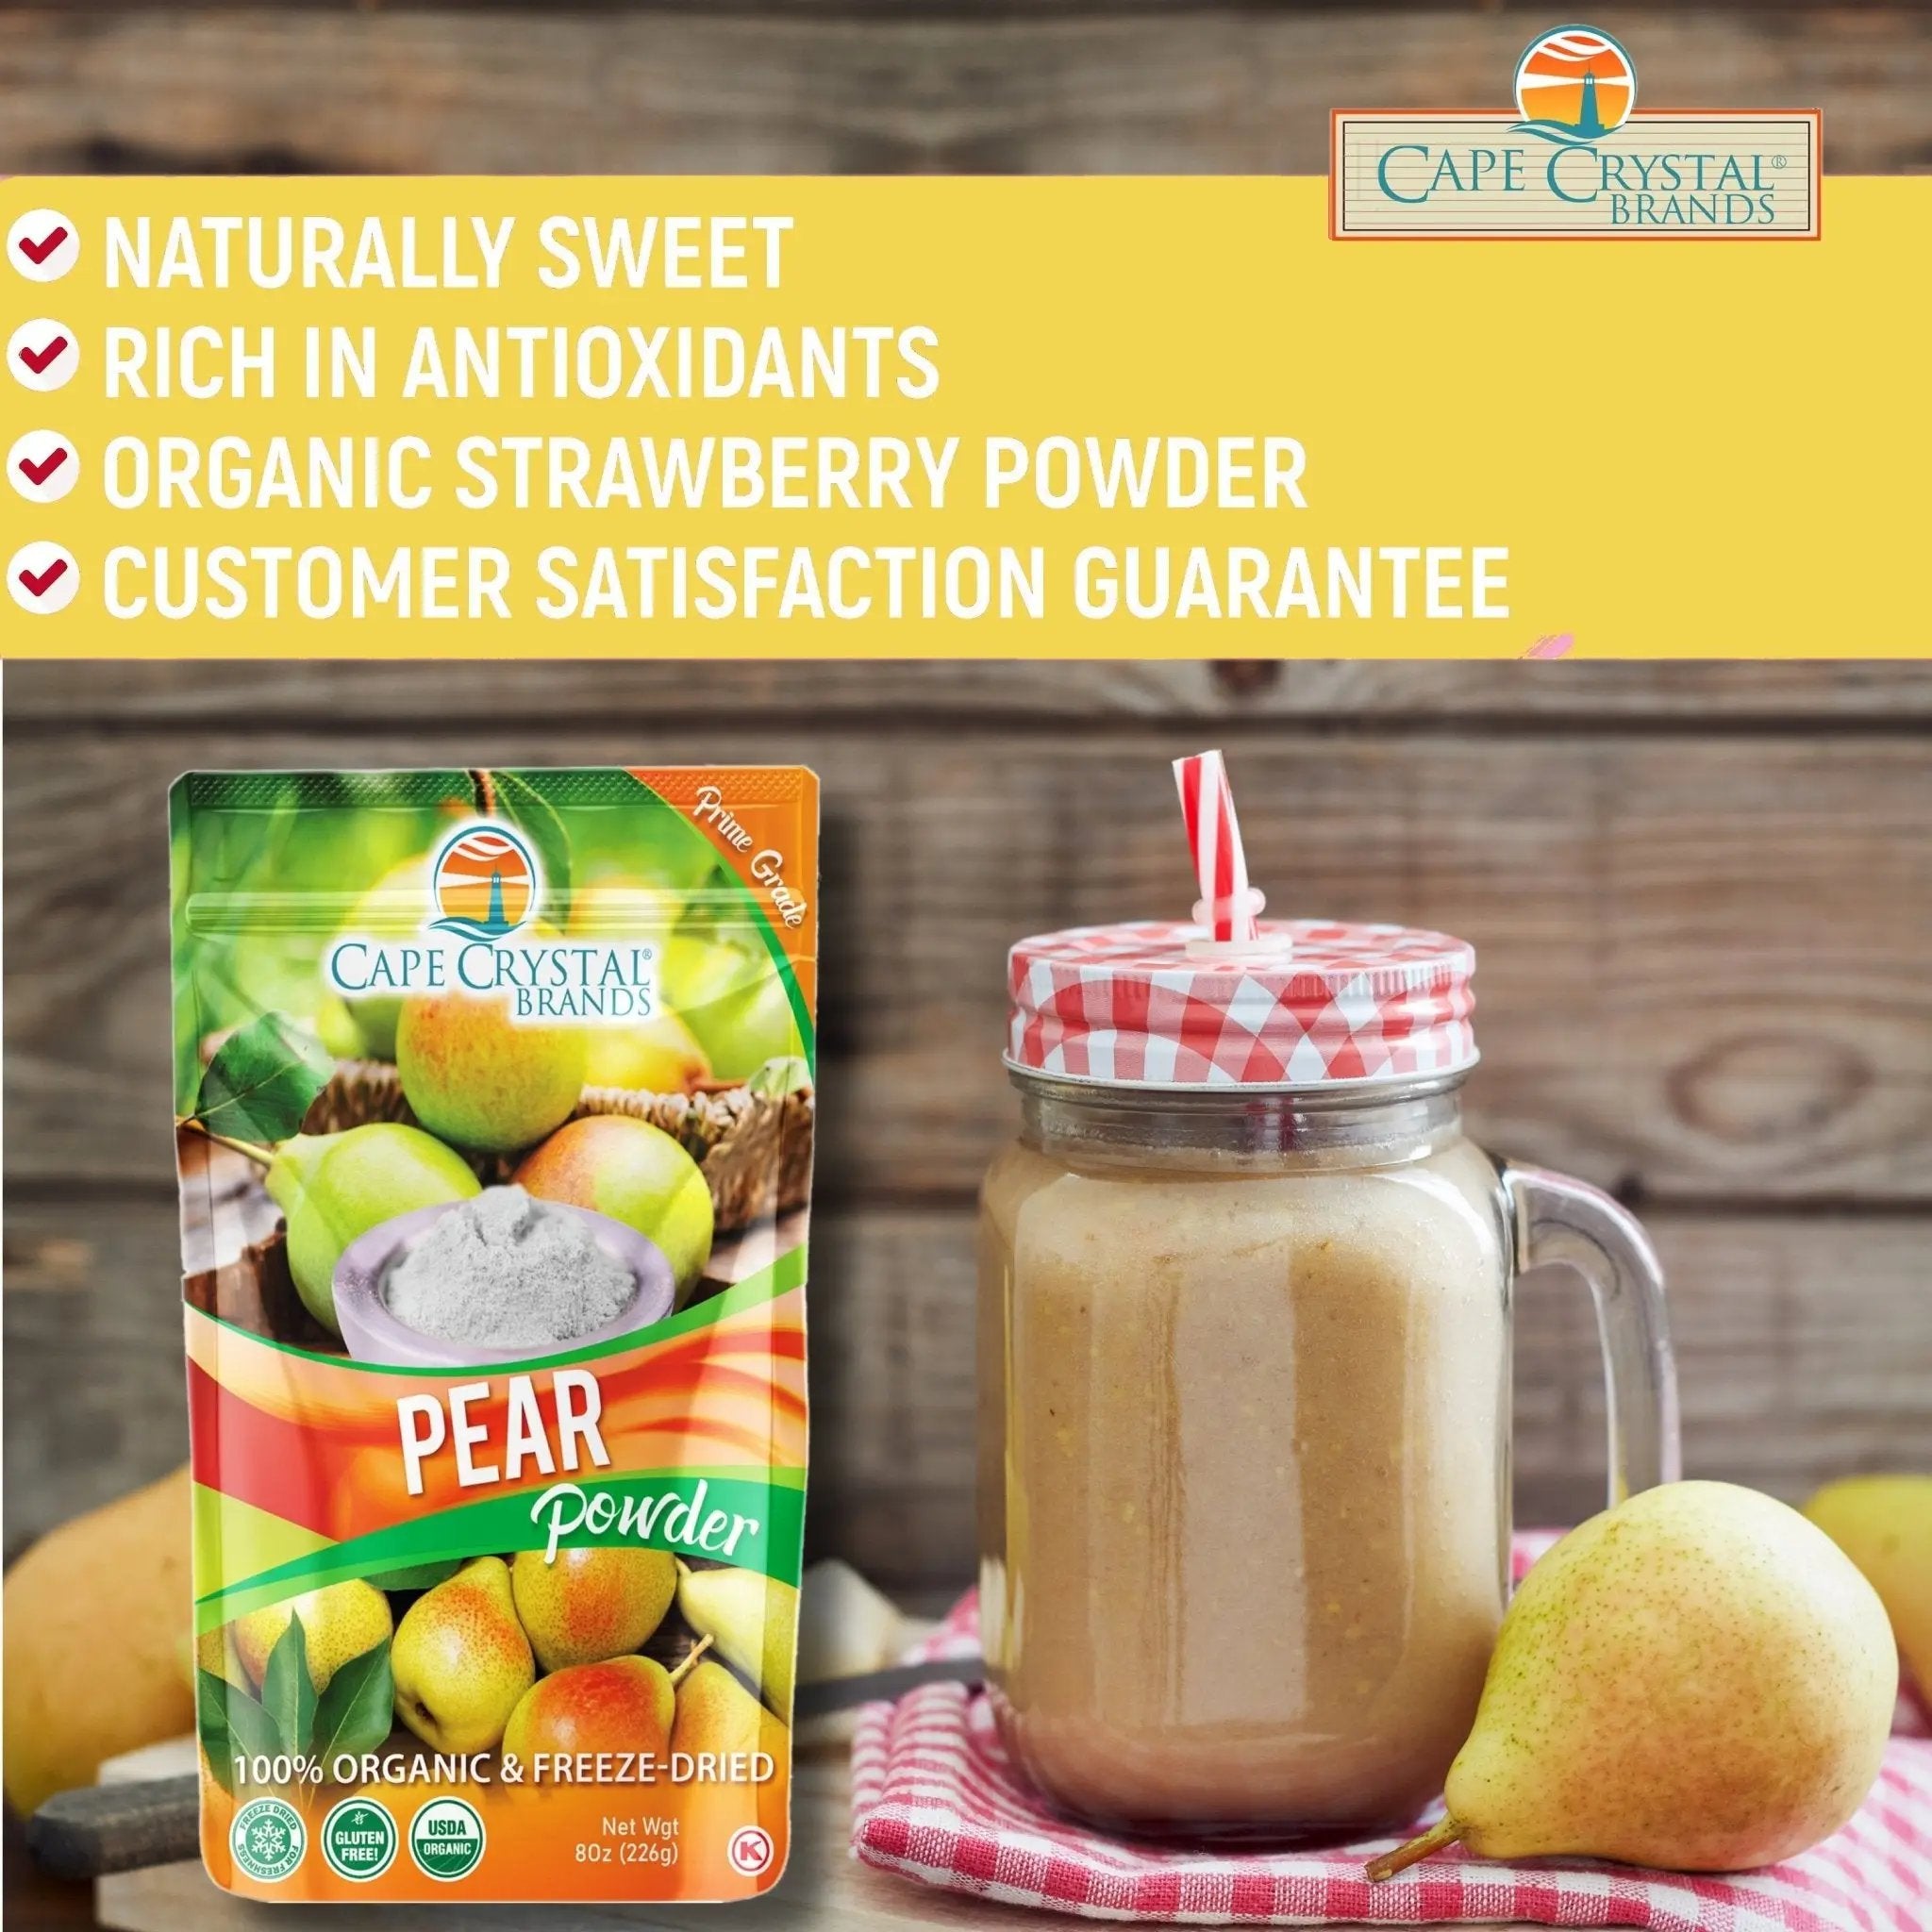 Cape Crystal Pear Powder Goodness – 8-oz., Freeze-Dried for Superior Taste, USDA Certified Organic, Non-GMO, Gluten Free, Vegan - Cape Crystal Brands